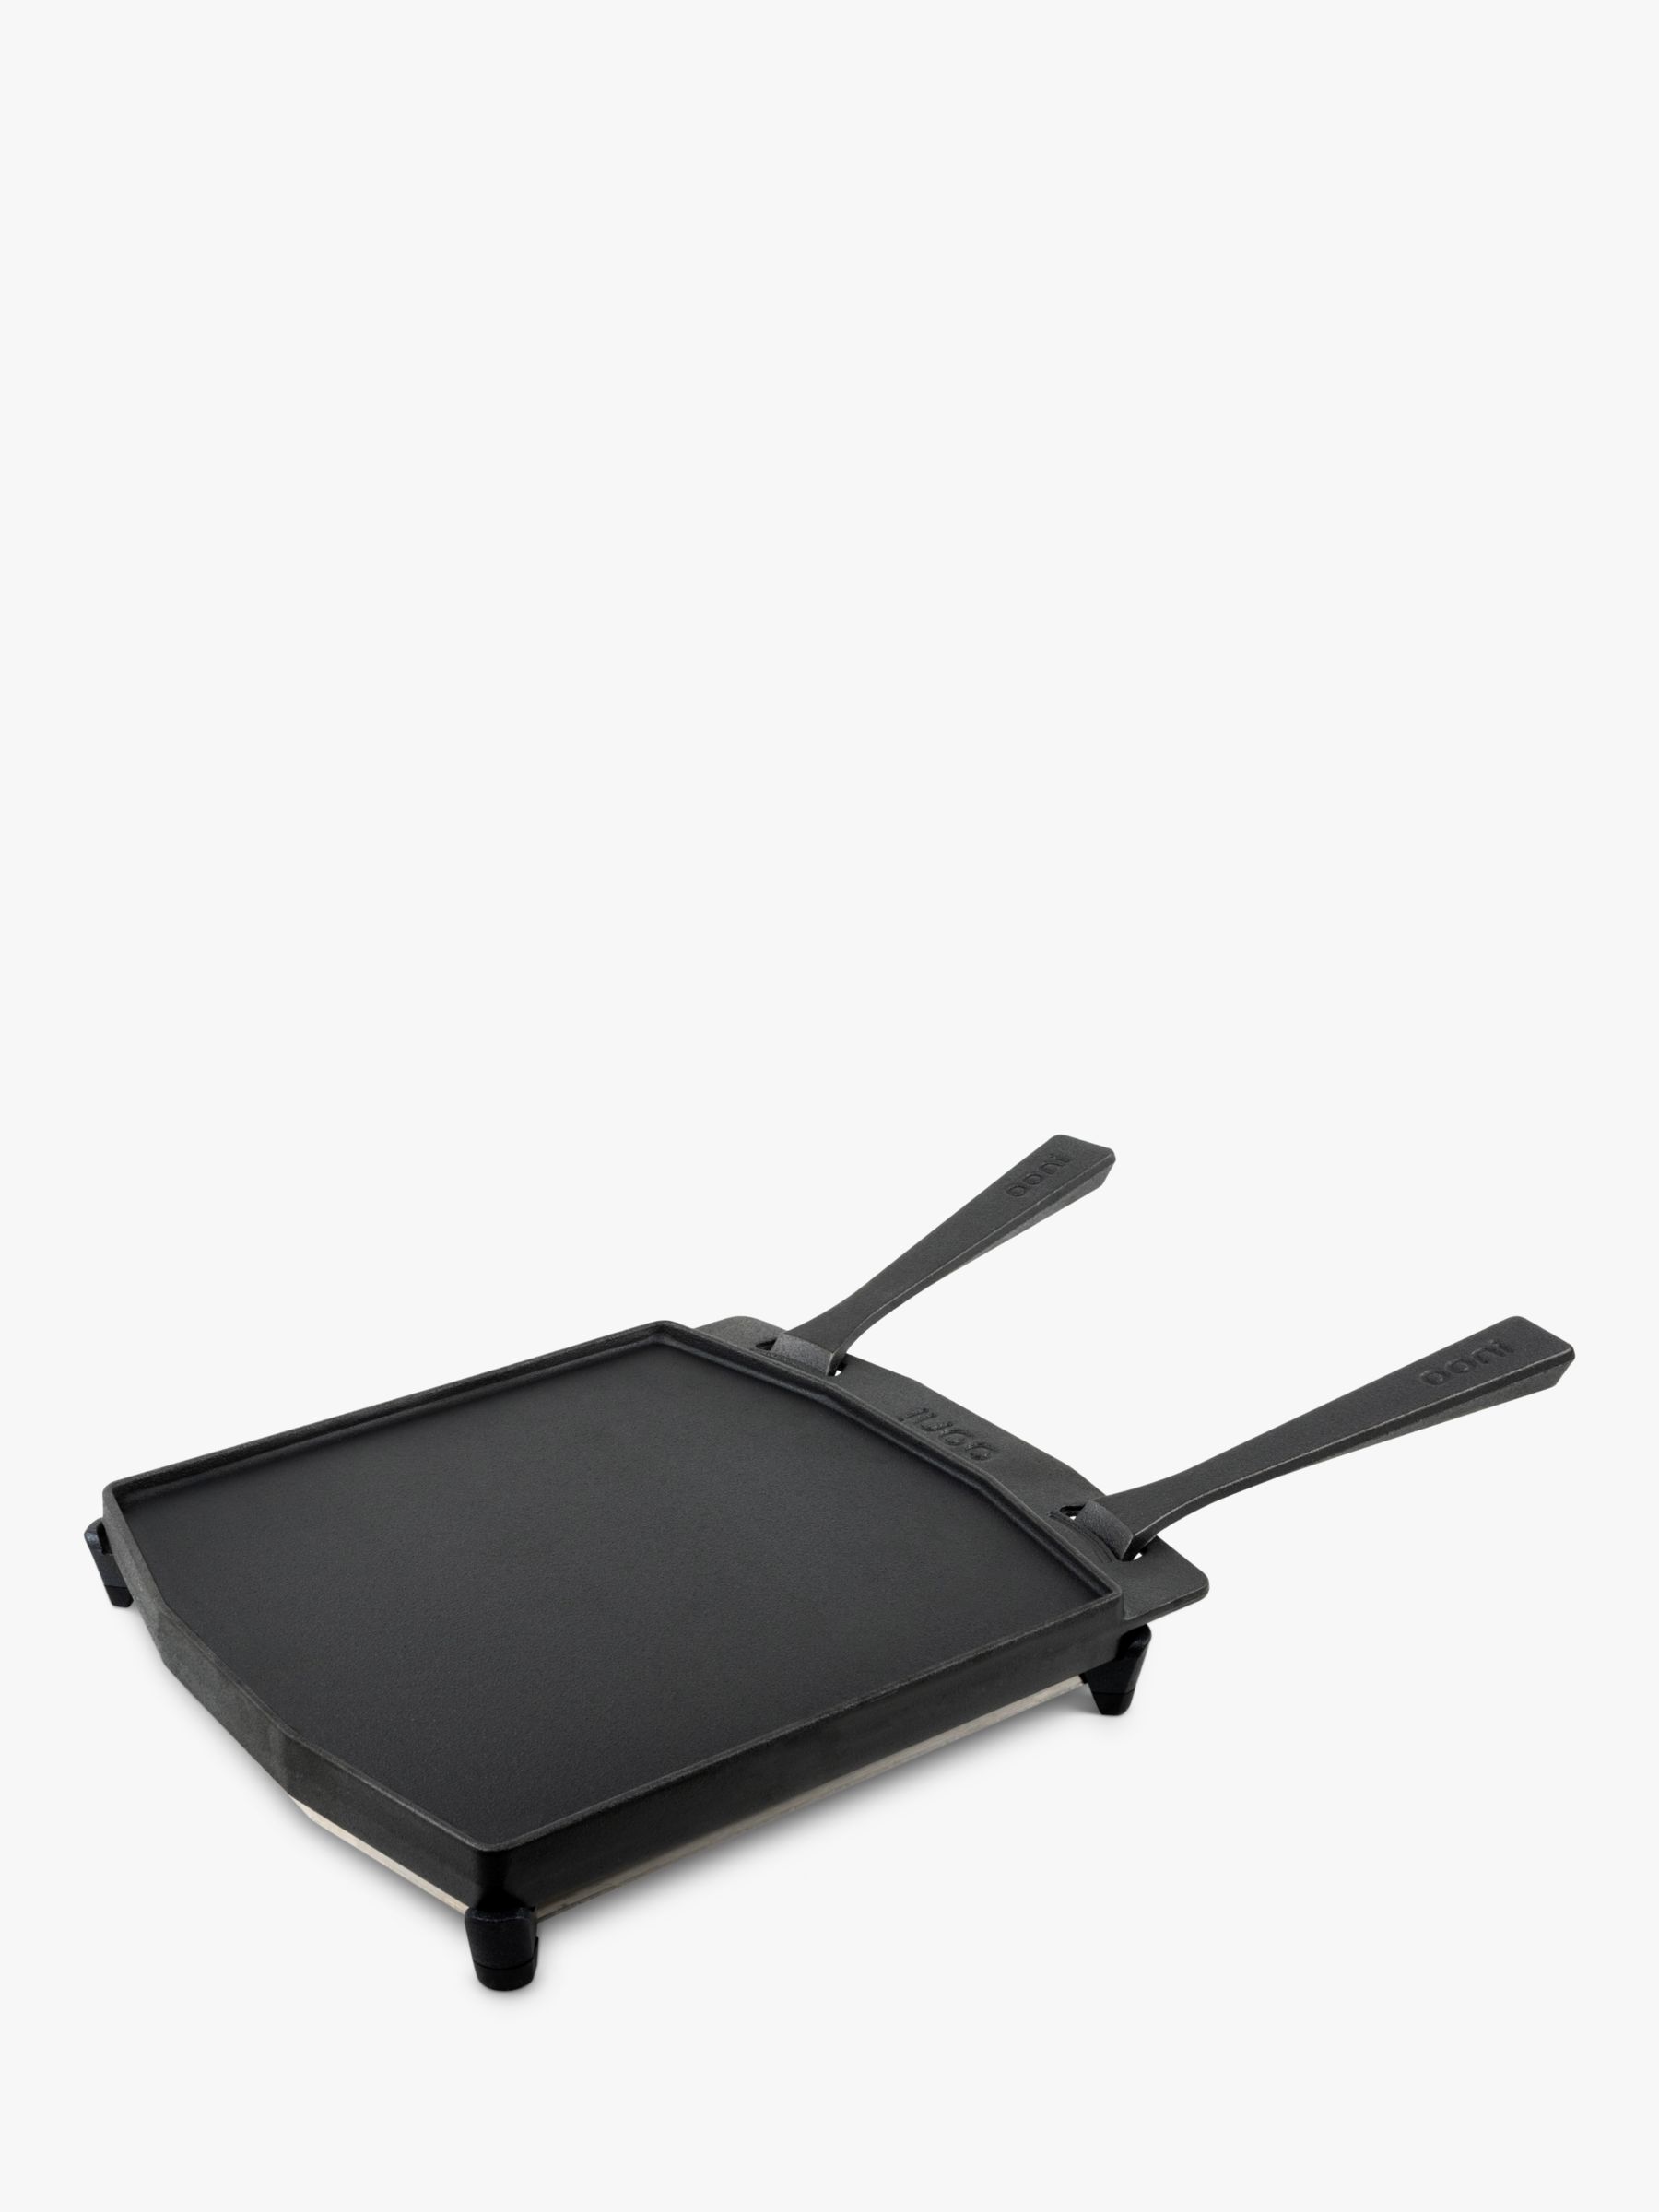 Ooni Cast Iron Grill Oven Plate at